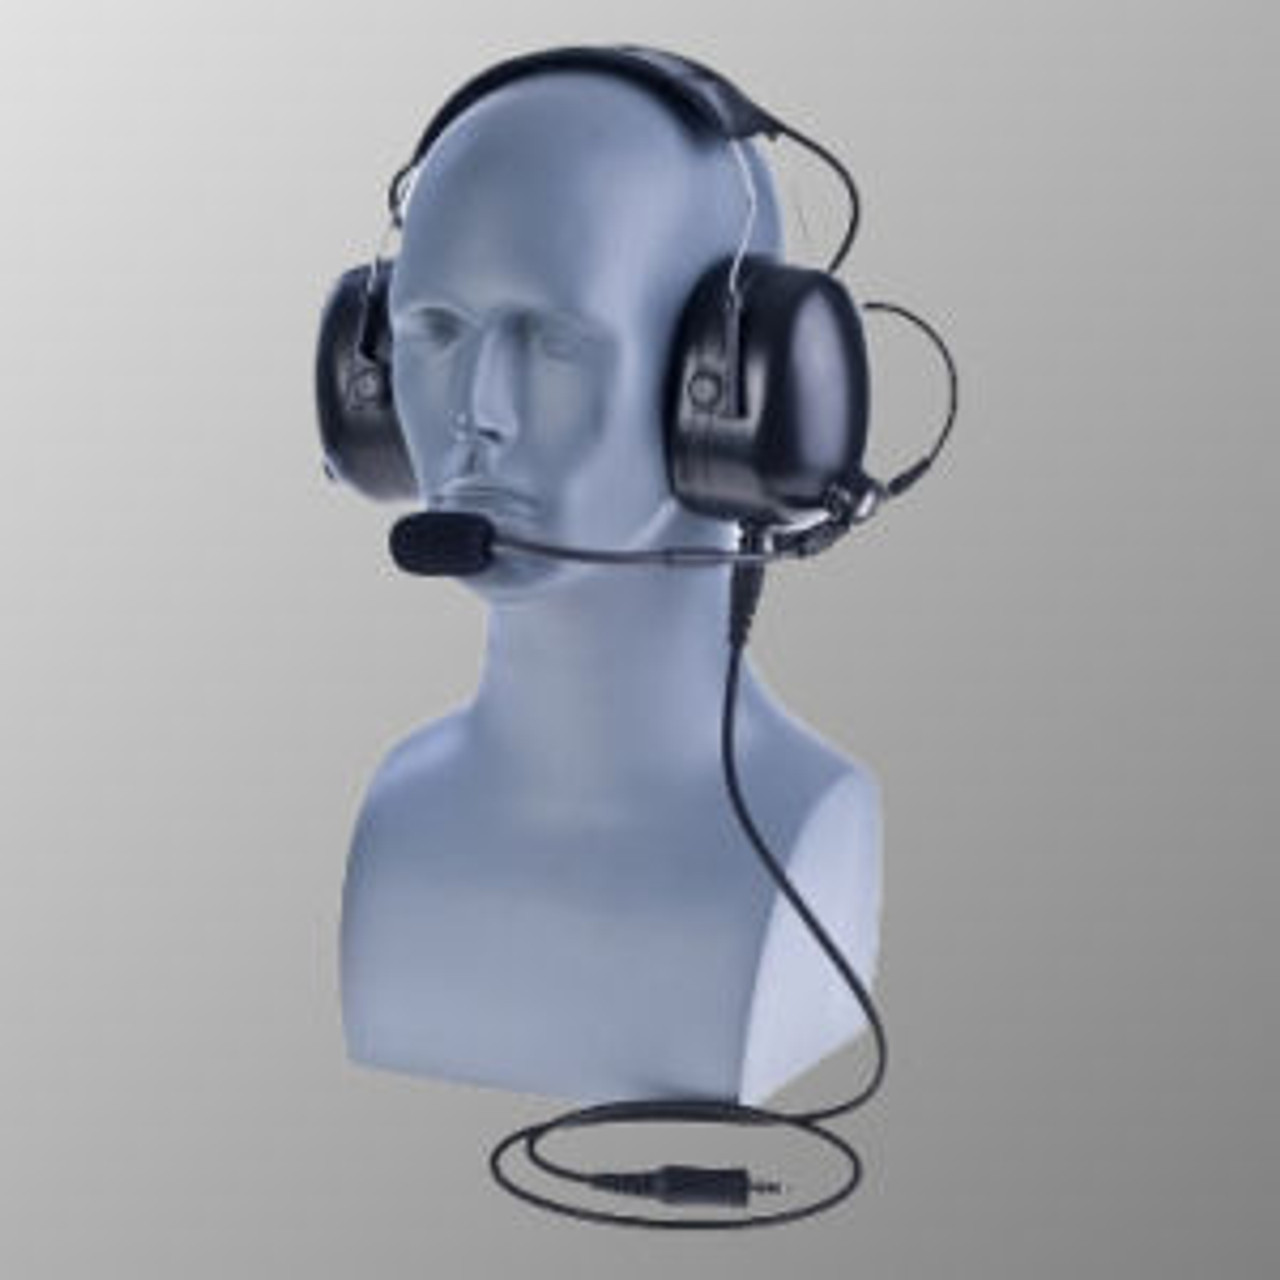 Motorola XPR7380e Over The Head Double Muff Headset With WIreless PTT